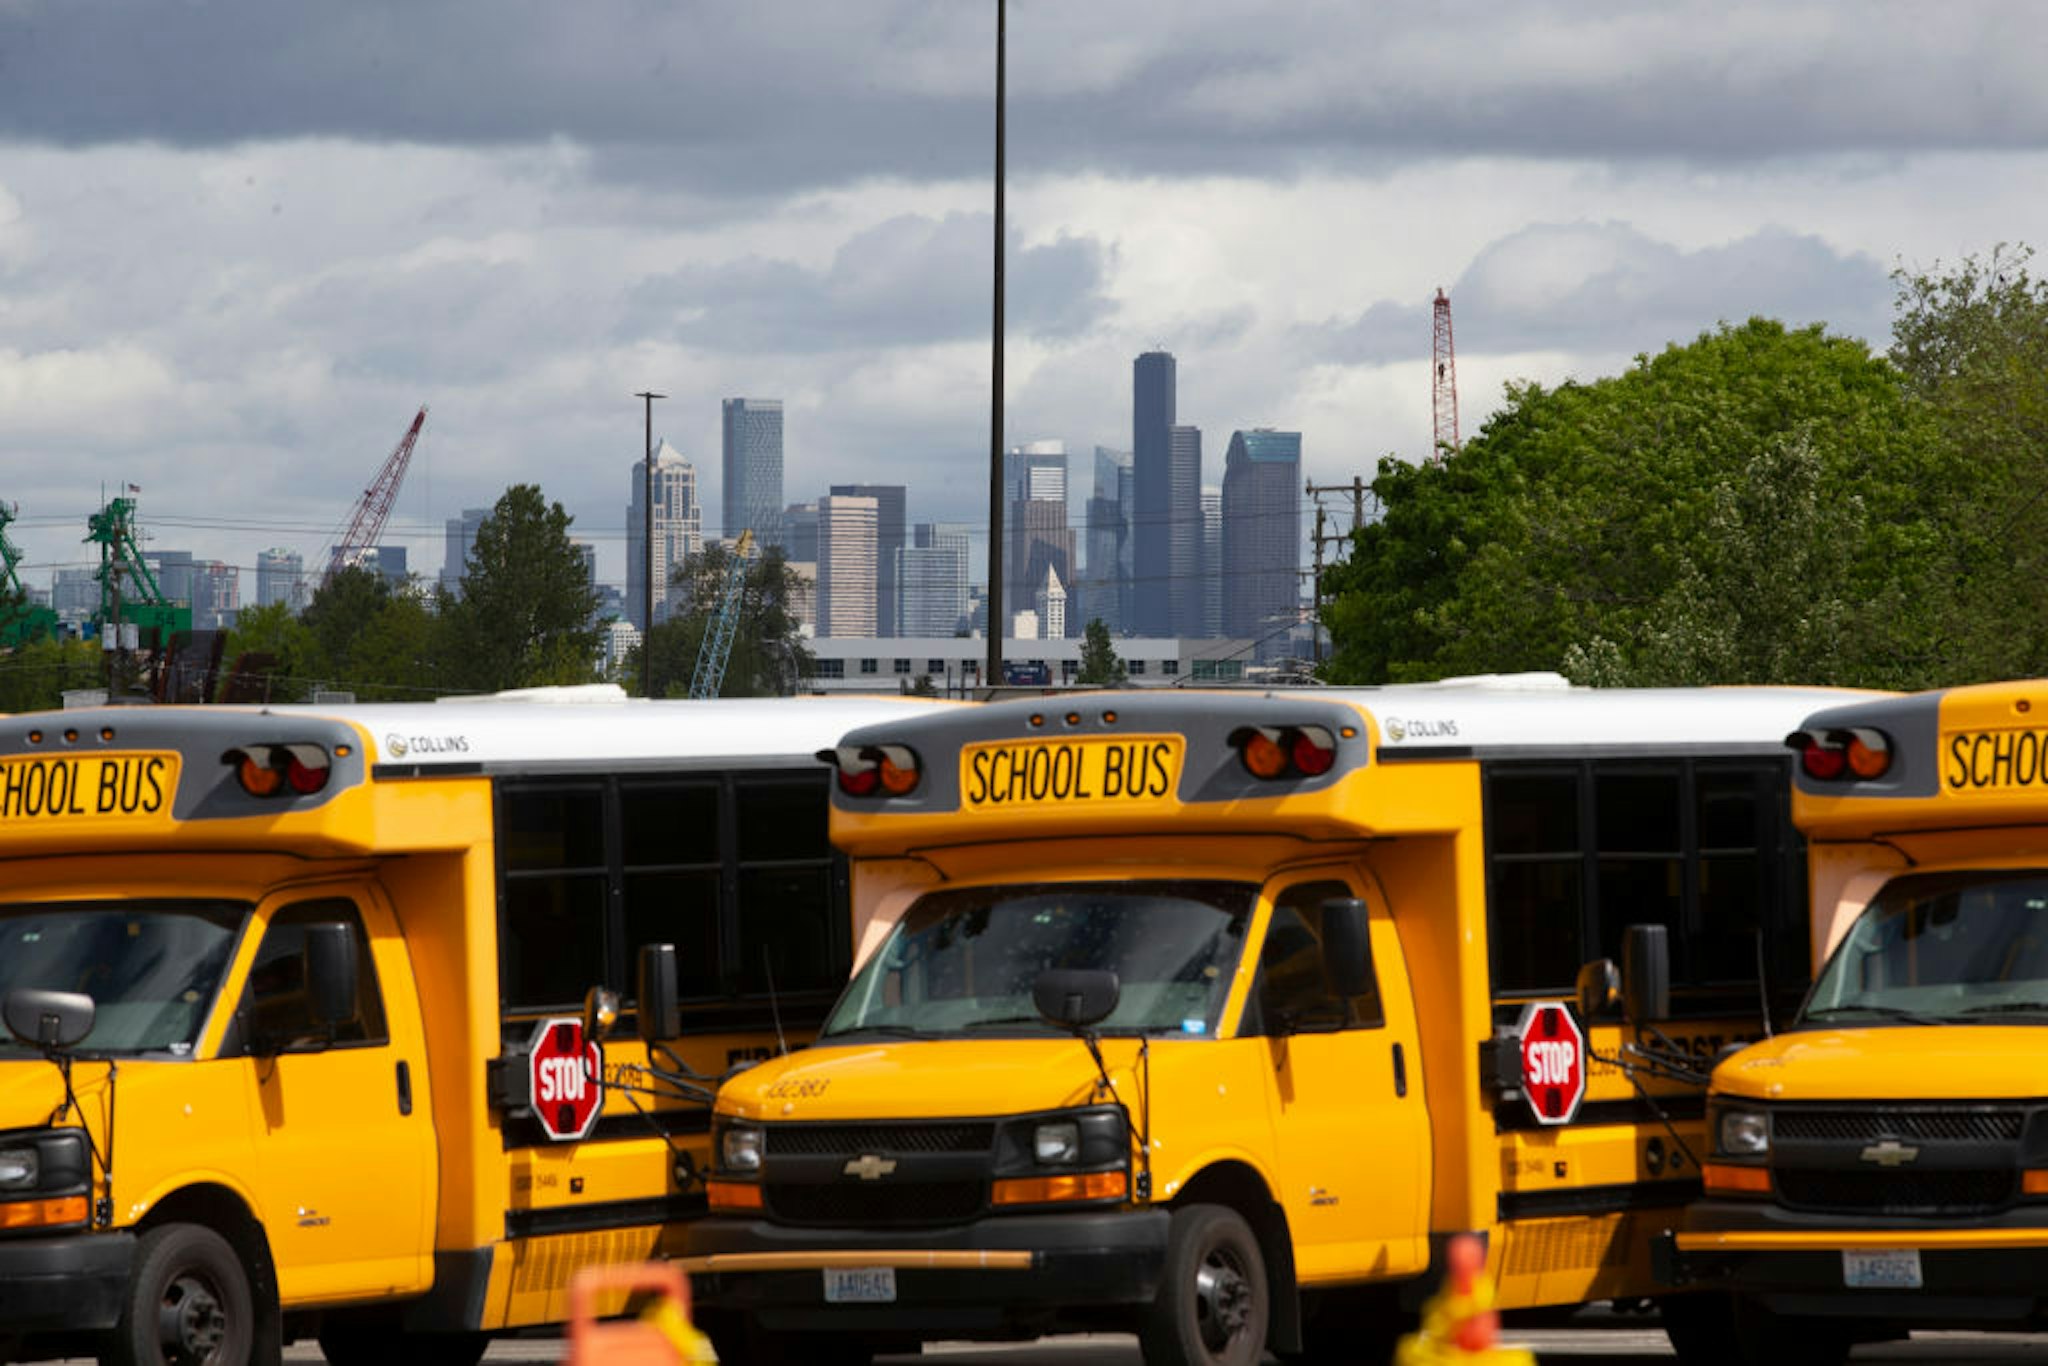 SEATTLE, WA - MAY 06: School buses sit idle in a bus yard on May 6, 2020 in Seattle, Washington. Since the outbreak of COVID-19 and the closure of all school buildings, the Seattle Public Schools Nutrition Services Department has been distributing breakfast and lunch to students through a network of 26 school sites and 43 bus routes five days a week. The meal distribution also includes additional food for weekends. Approximately 6,500 people are served per day through the program. (Photo by Karen Ducey/Getty Images)